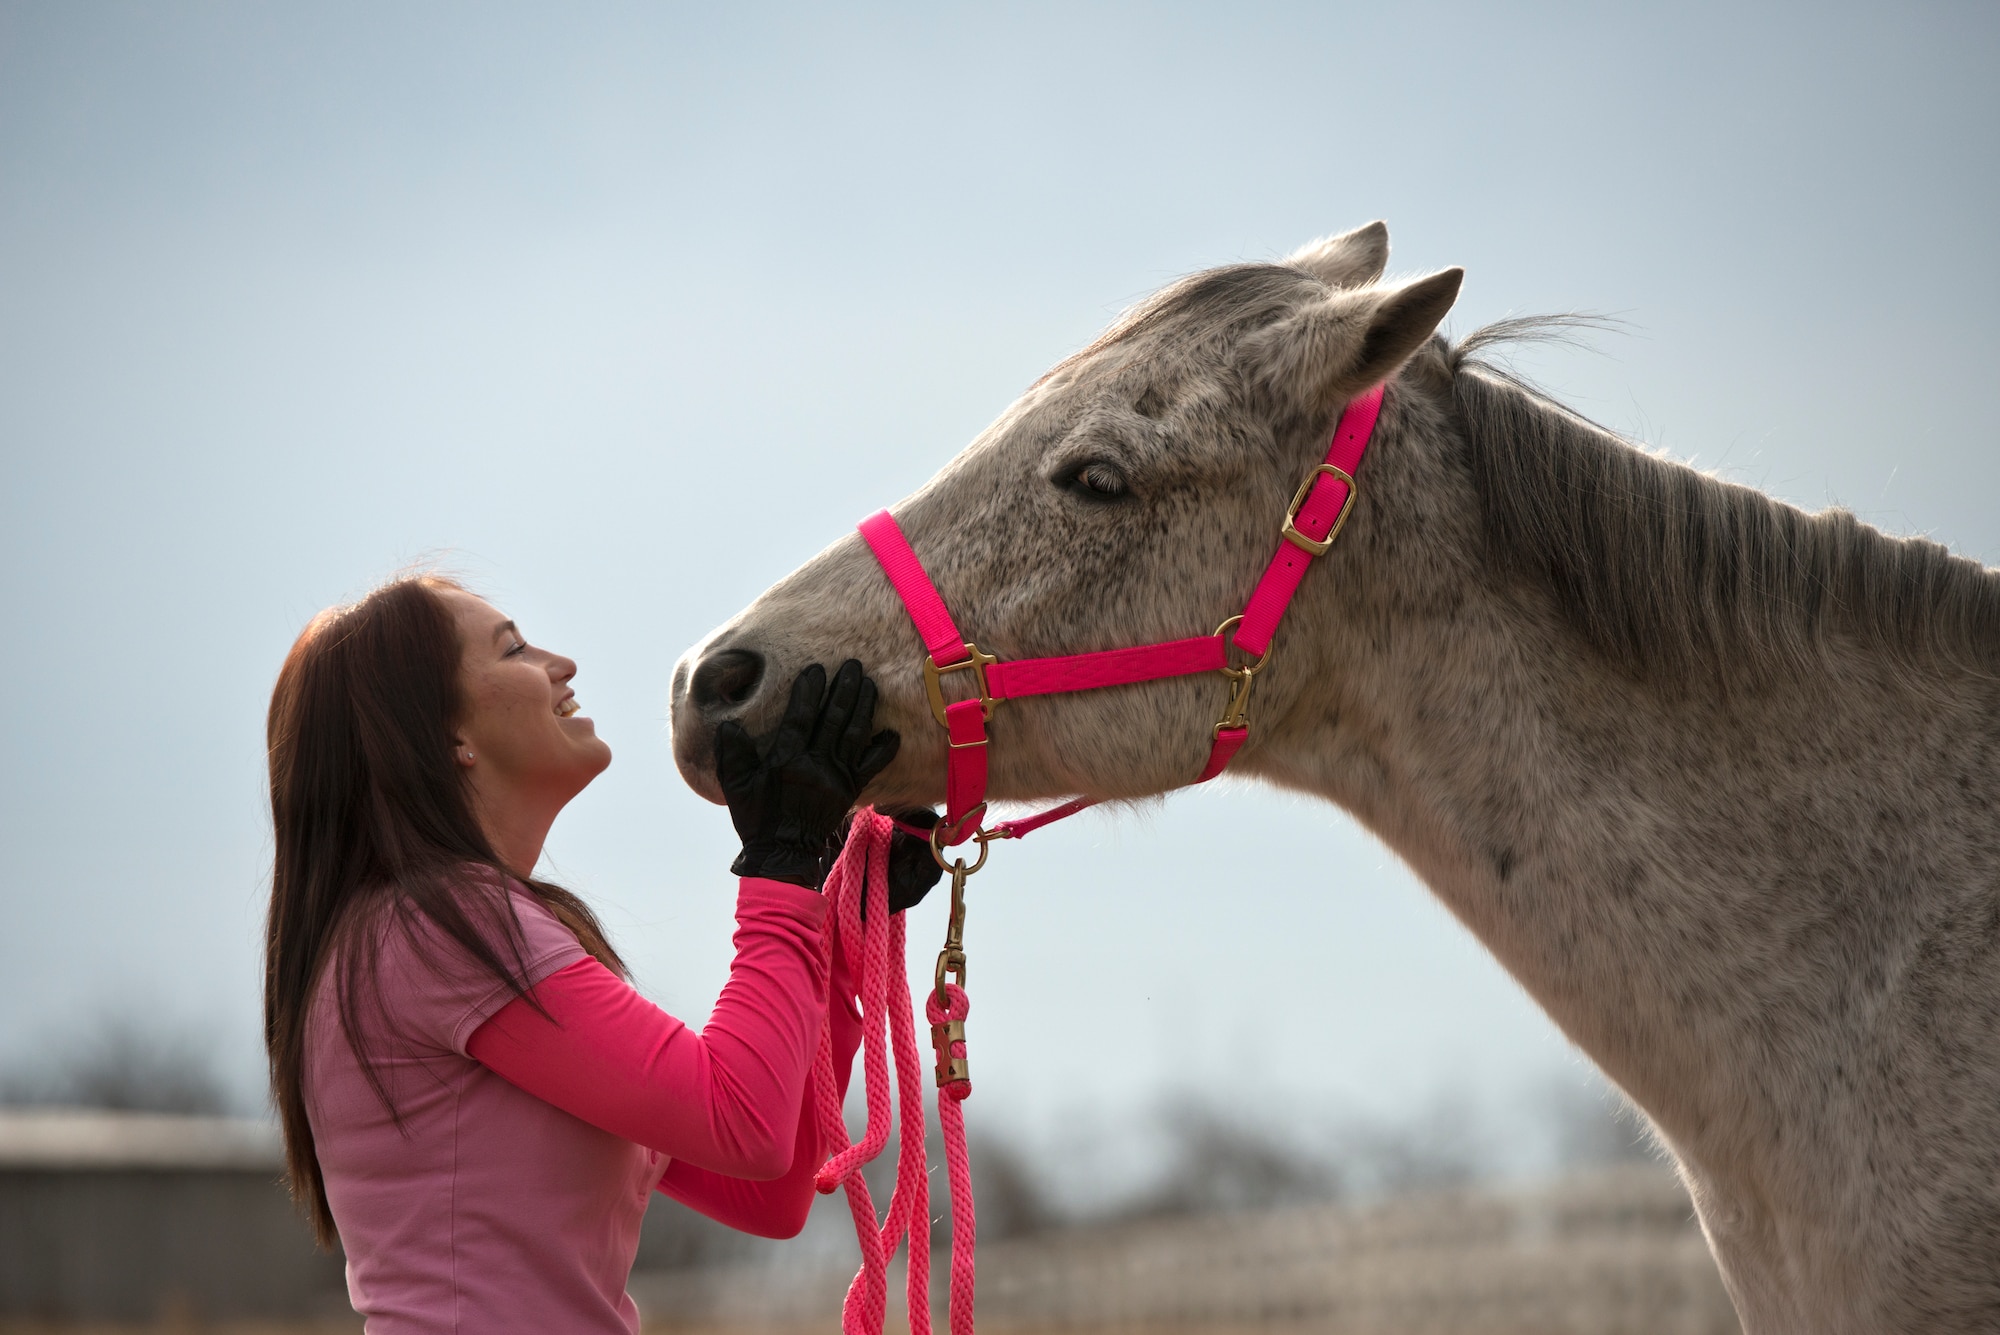 Airman 1st Class Kaitlyn Evans, an 11th Security Forces Squadron patrolman, spends time with her horse in Lothian, Maryland after her military duty day is complete. Evans, a North Carolina native, relocated her horse to Maryland at her own expense to continue competing with the horse. Spending about two hours of time with her horse has helped Evans cope physically and mentally as she begins her military career. (U.S. Air Force photo/Staff Sgt. Vernon Young Jr.)